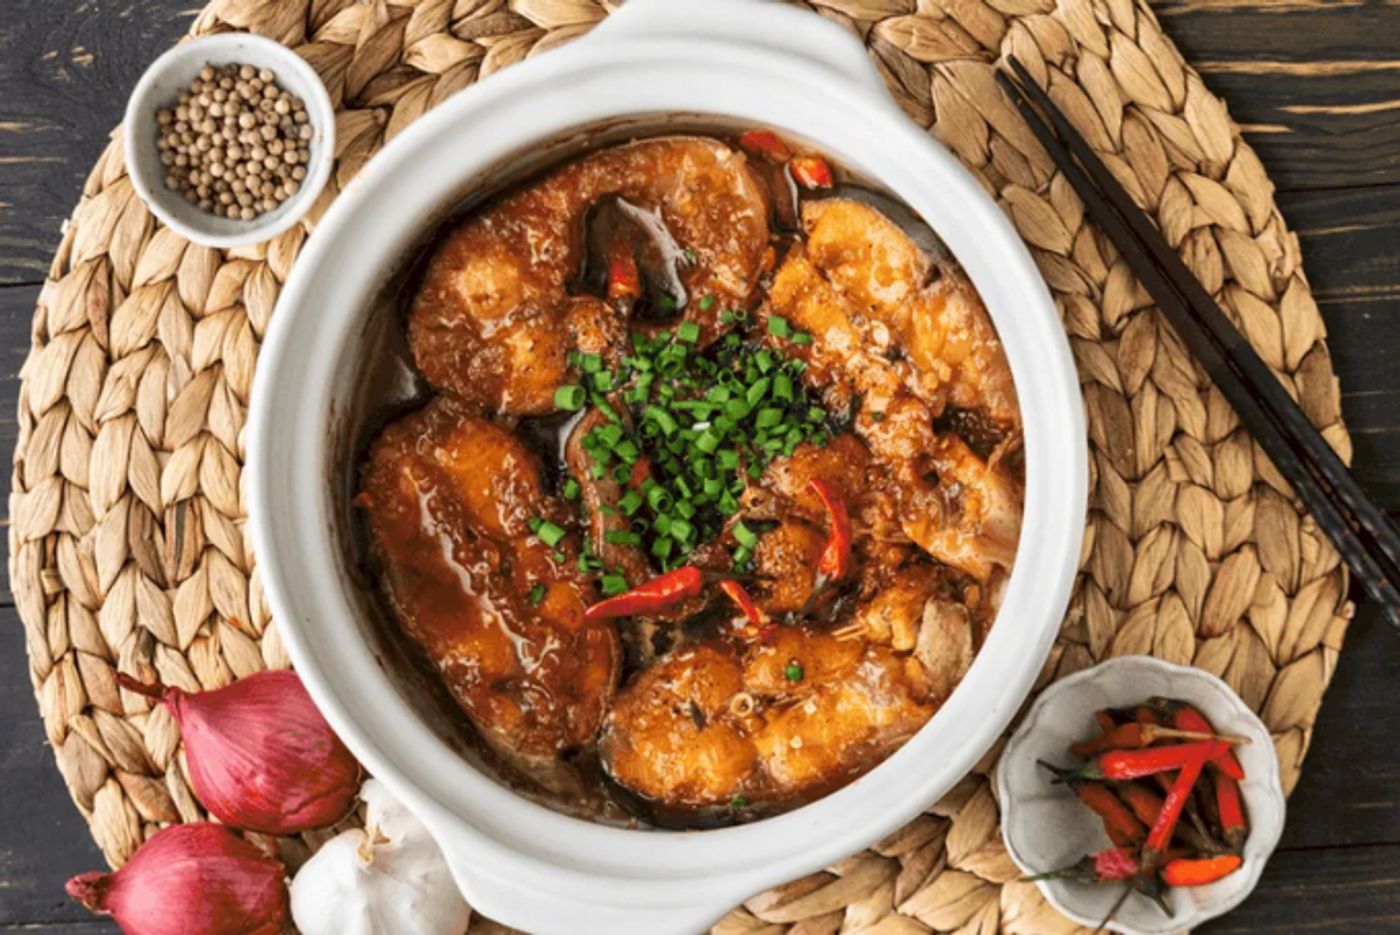 Braised fish - a familiar dish in Vietnamese family meals